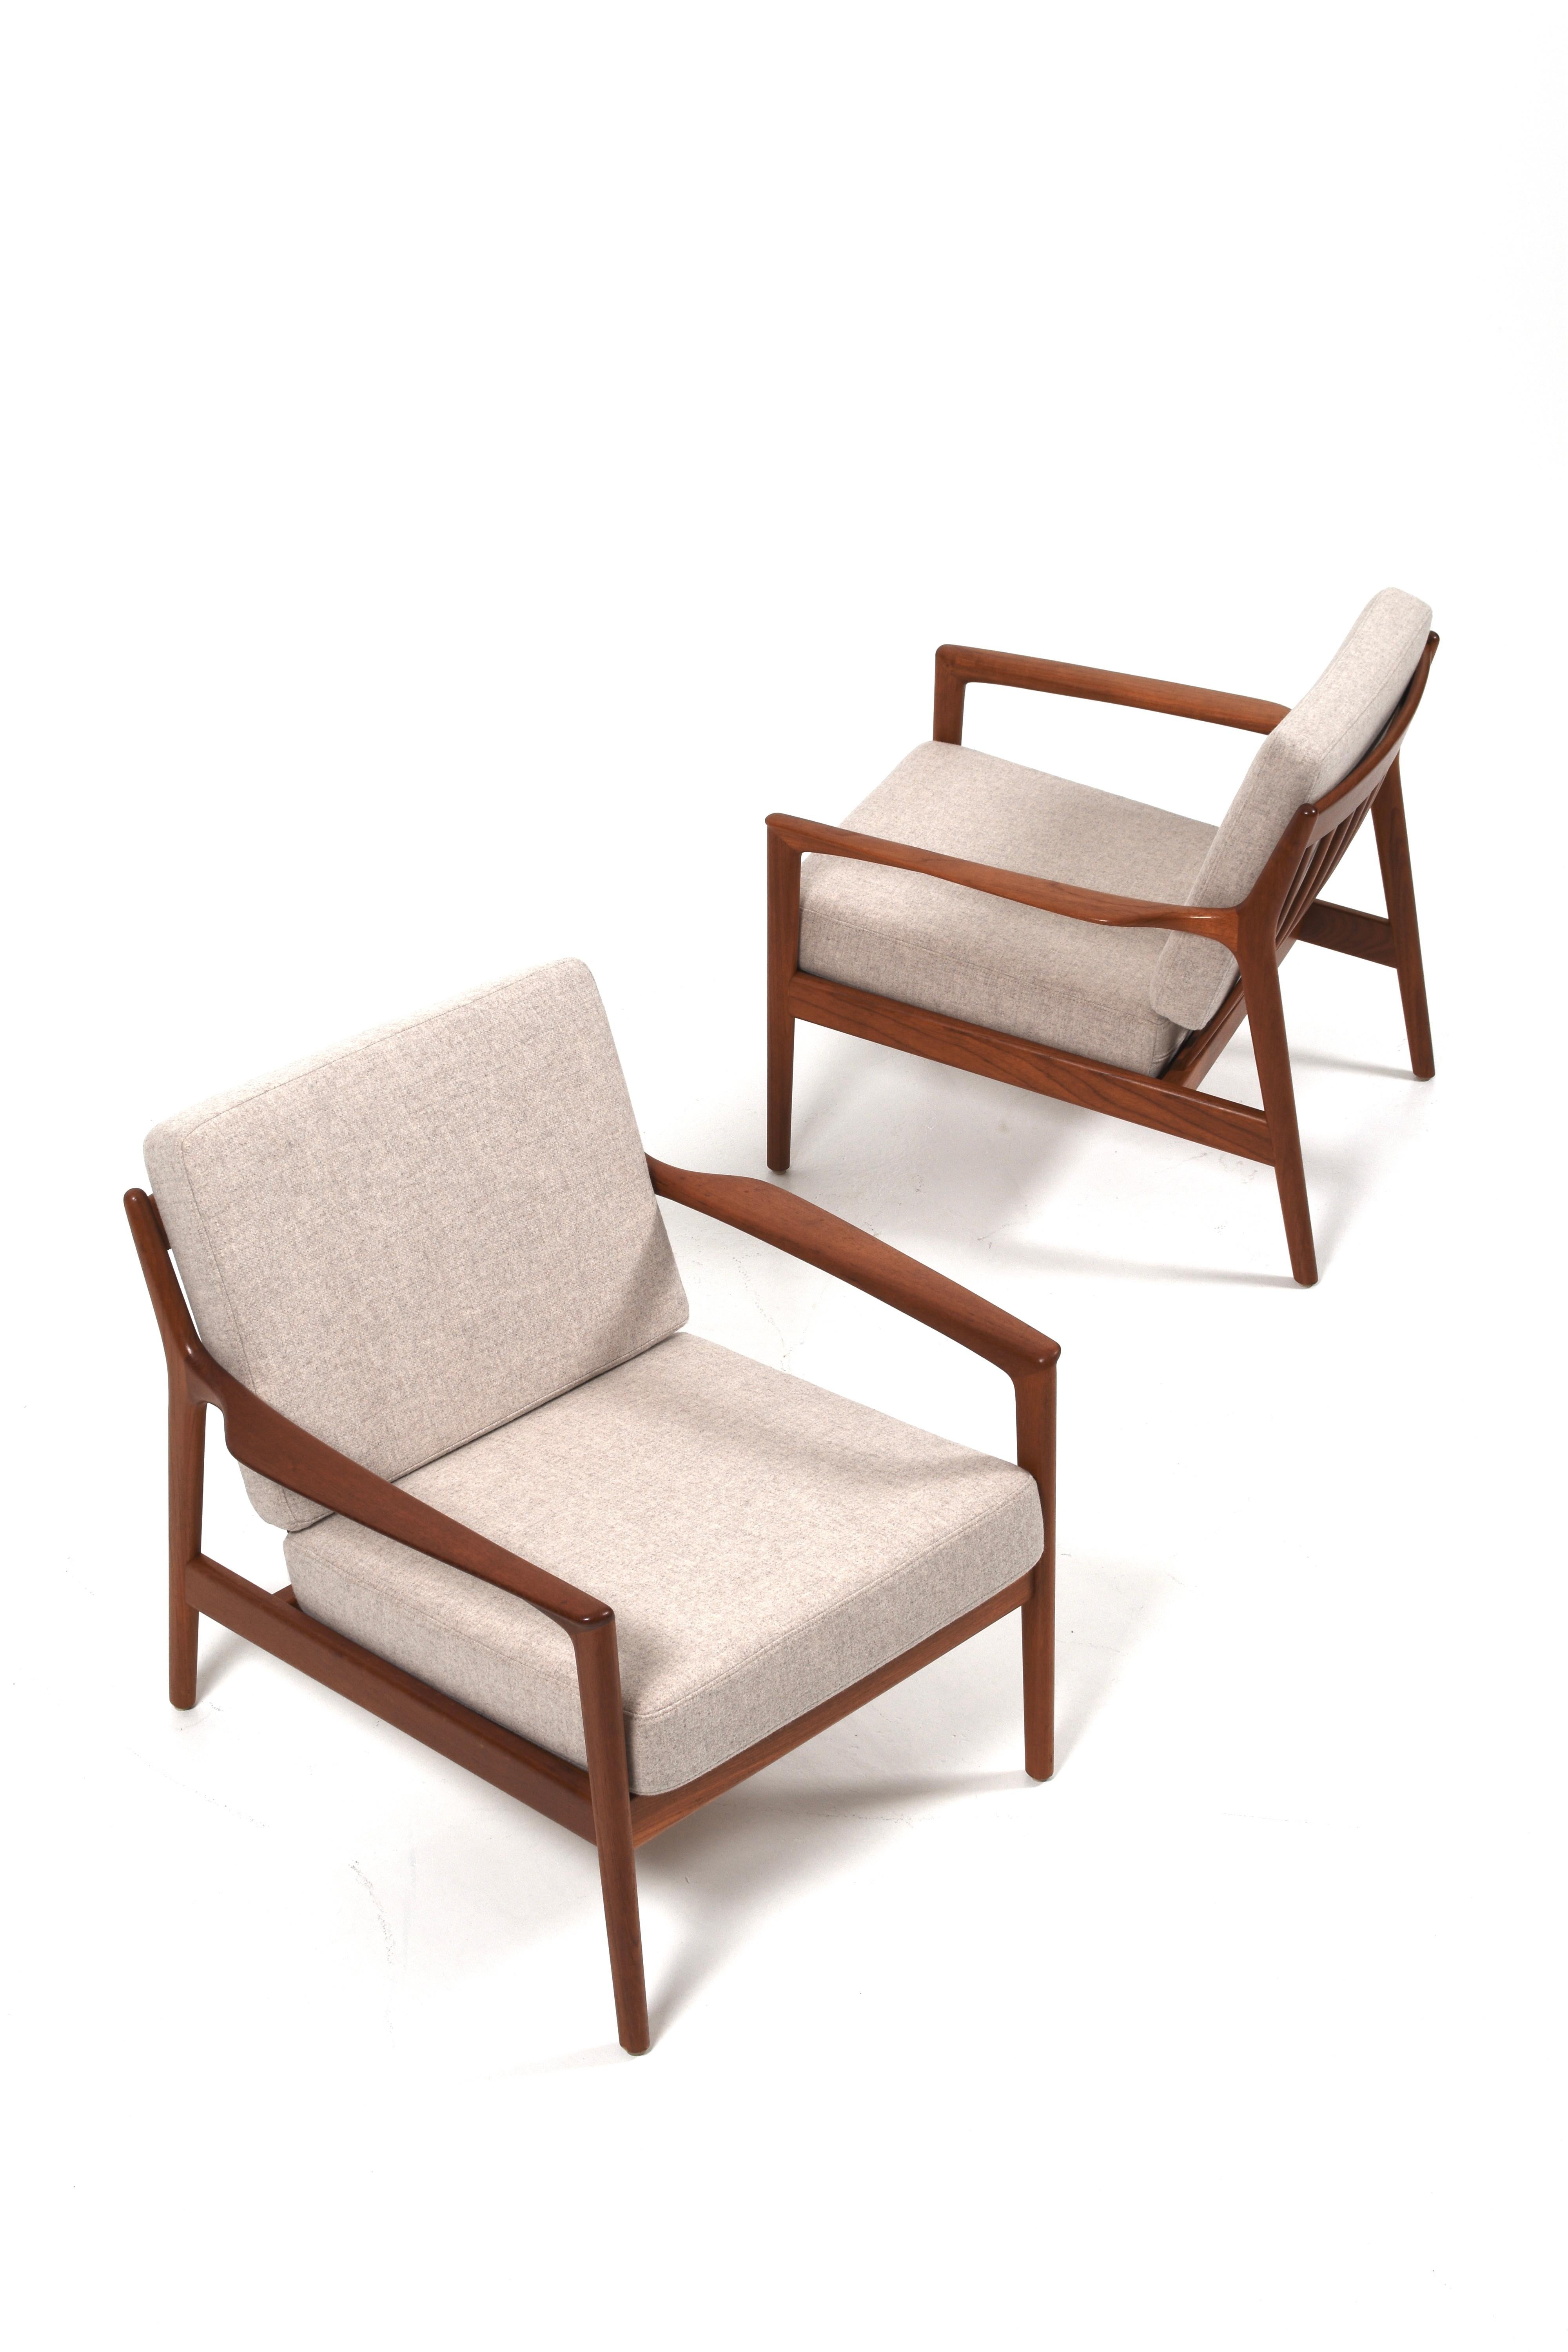 Mid-Century Modern Pair of “USA 75” Teak Lounge Chairs by Folke Ohlsson for DUX, Sweden, 1960s For Sale